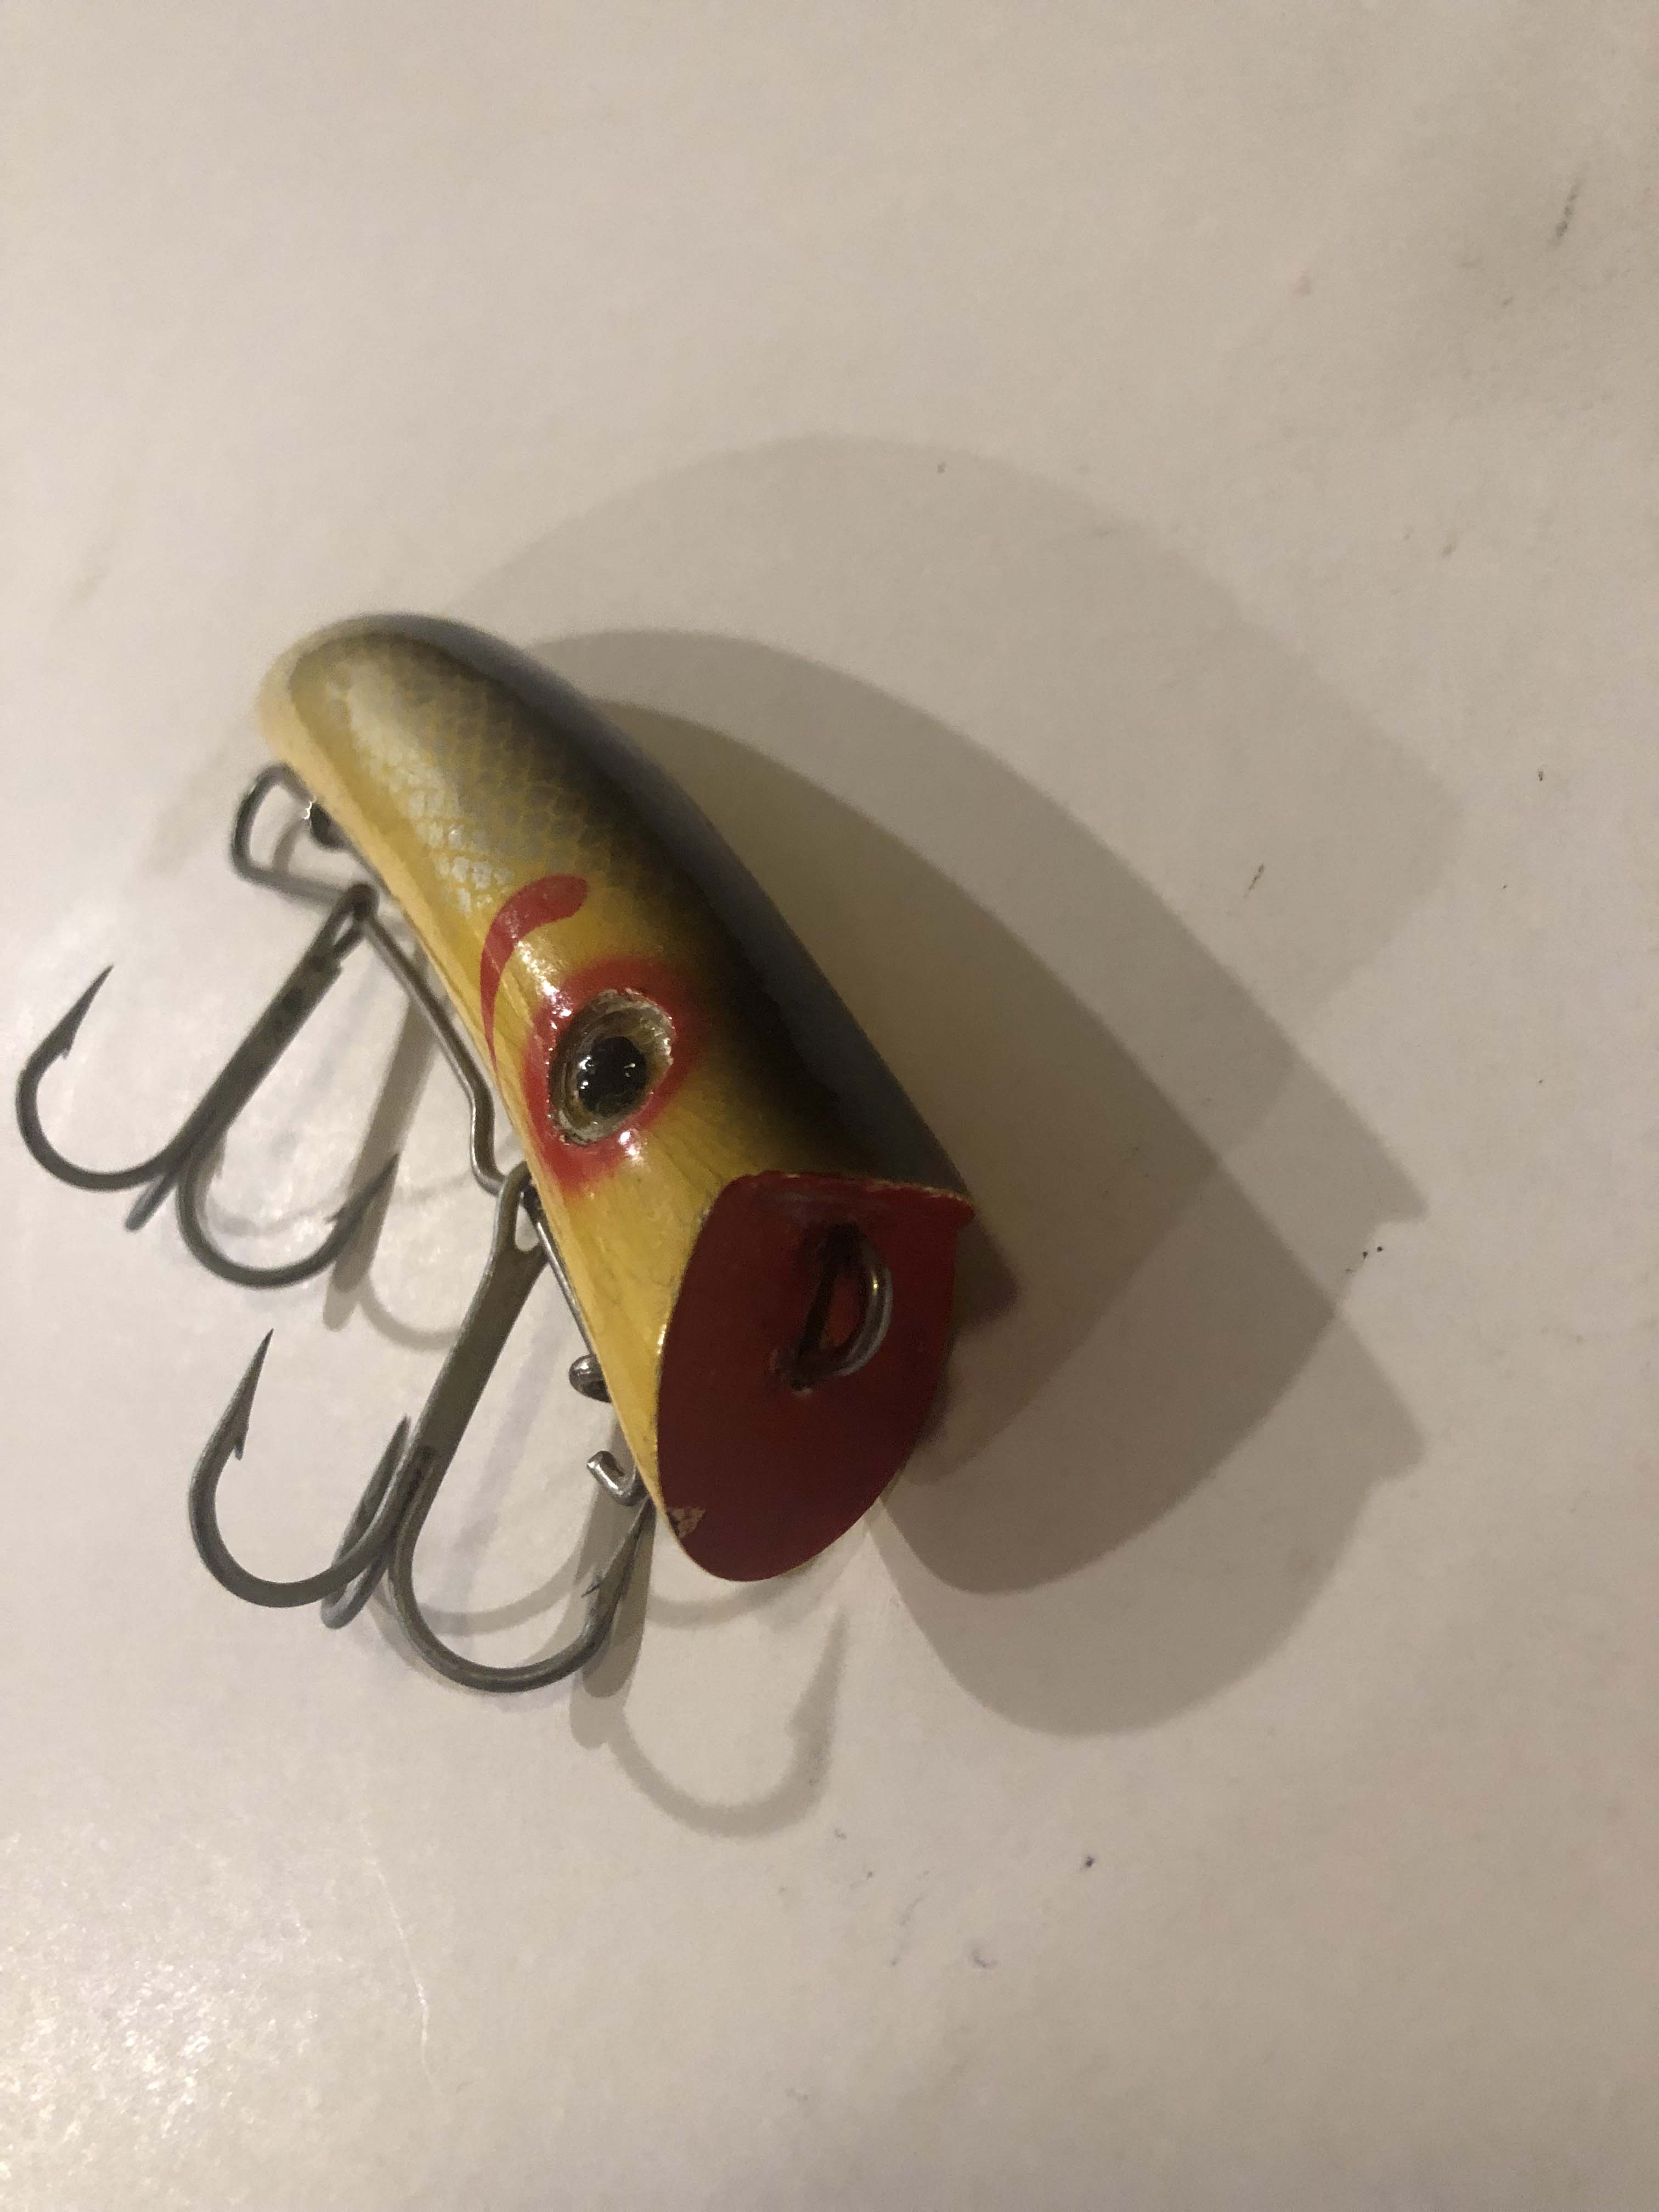 HARD TO FIND 40'S NELSON WILD ACTION BANANA LURE